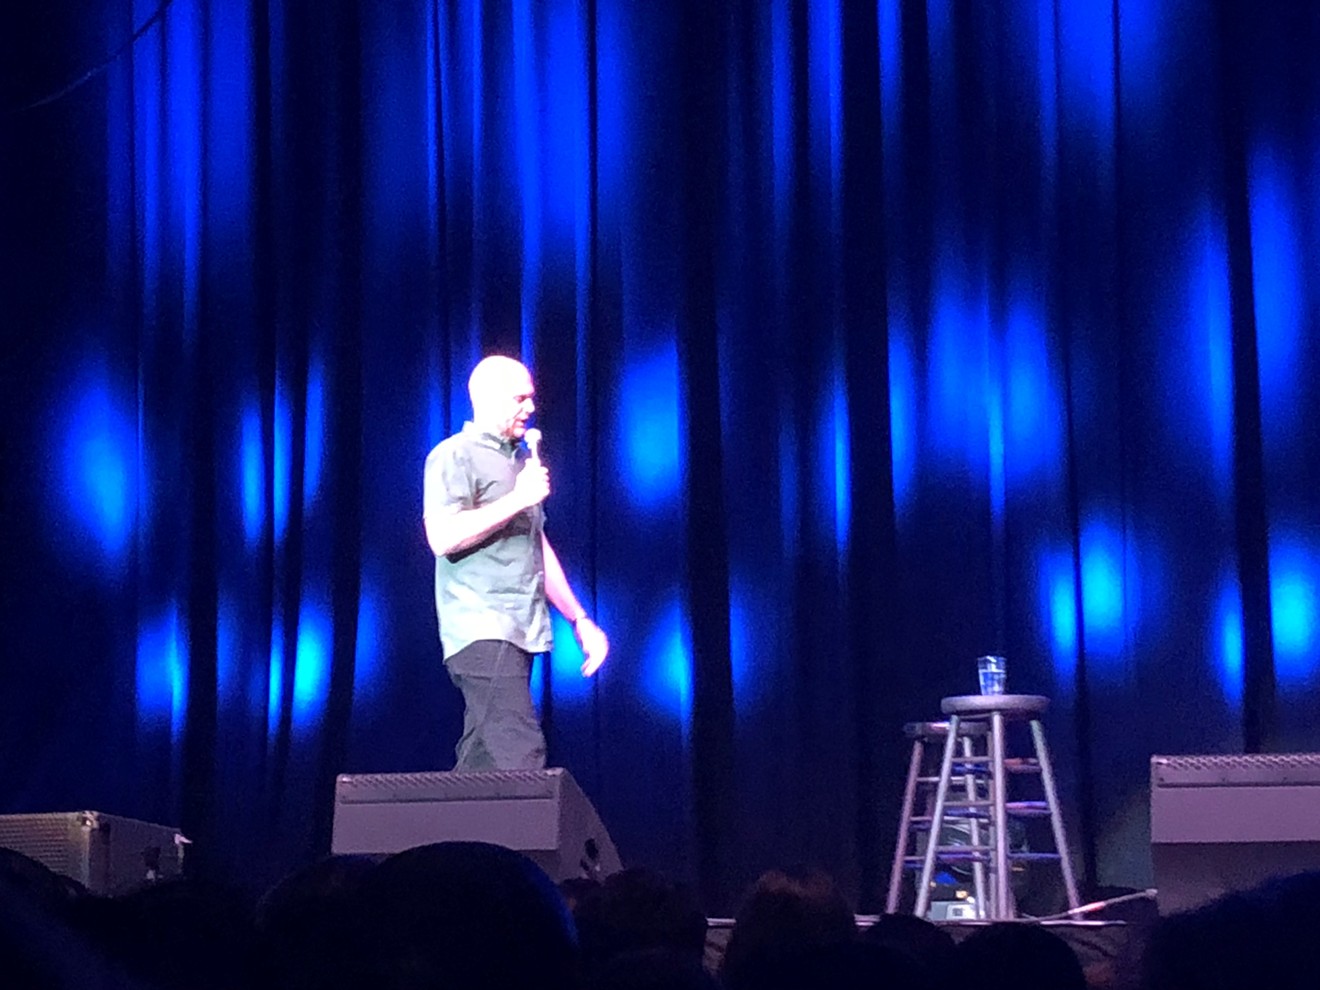 Bill Burr had a packed house rolling Thursday night at Revention Music Center.